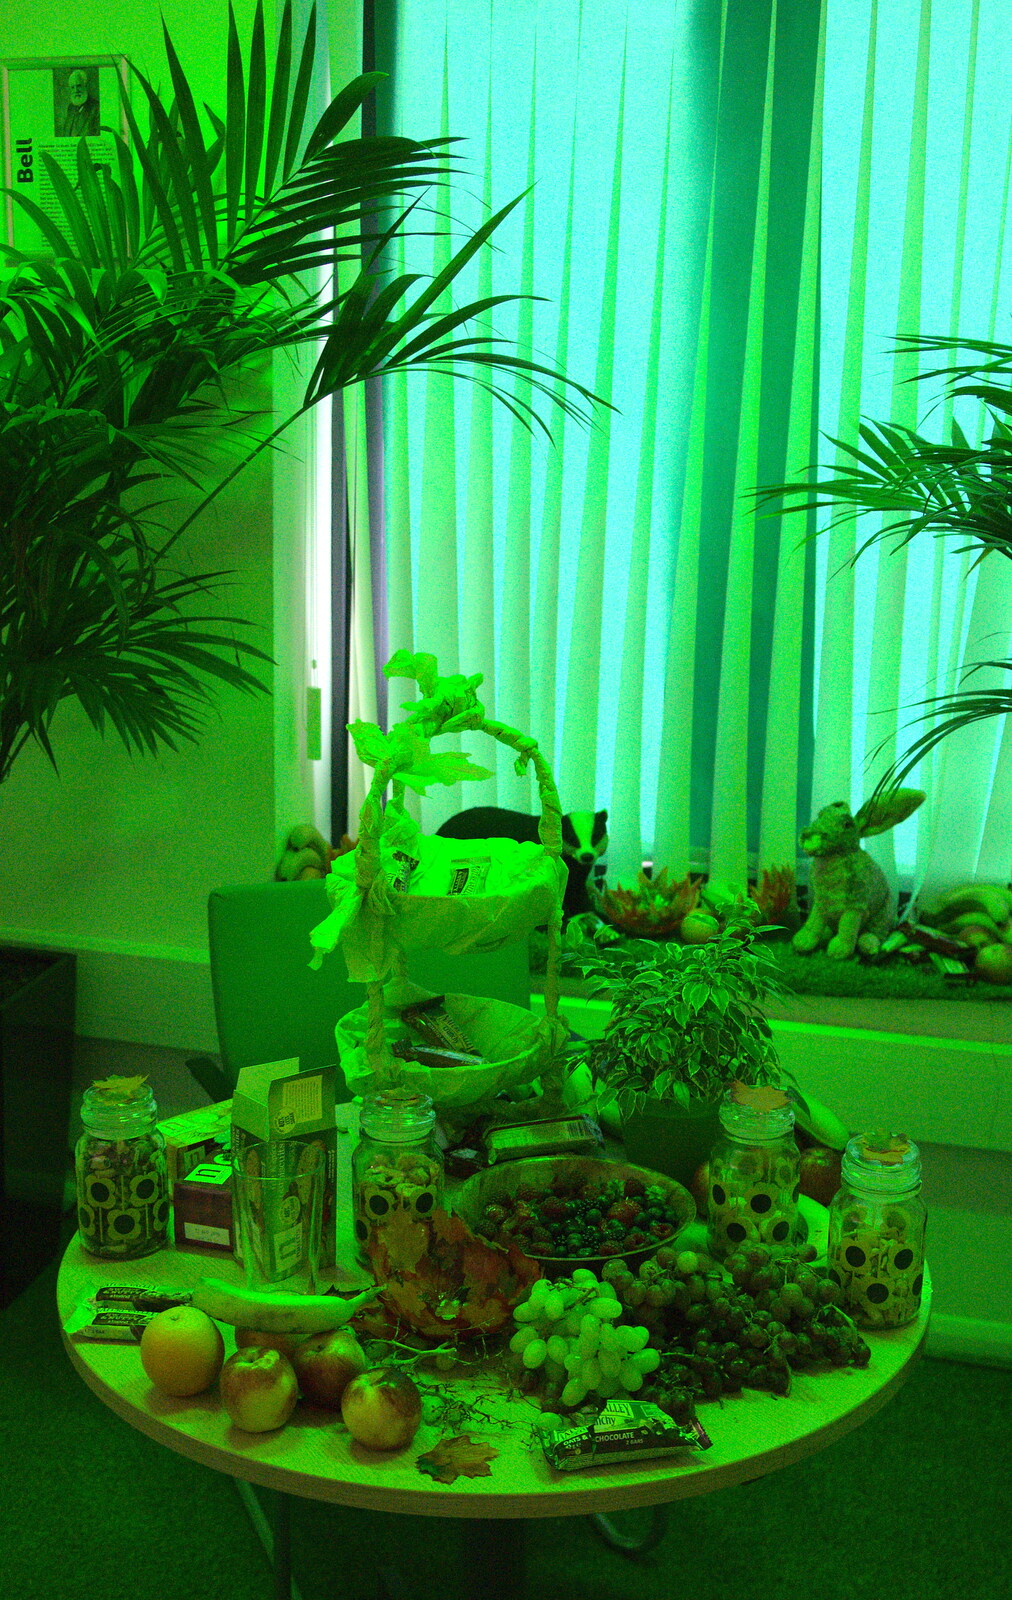 There's a very green 'jungle' room from SwiftKey Innovation Week, Southwark Bridge Road, London - 7th October 2015